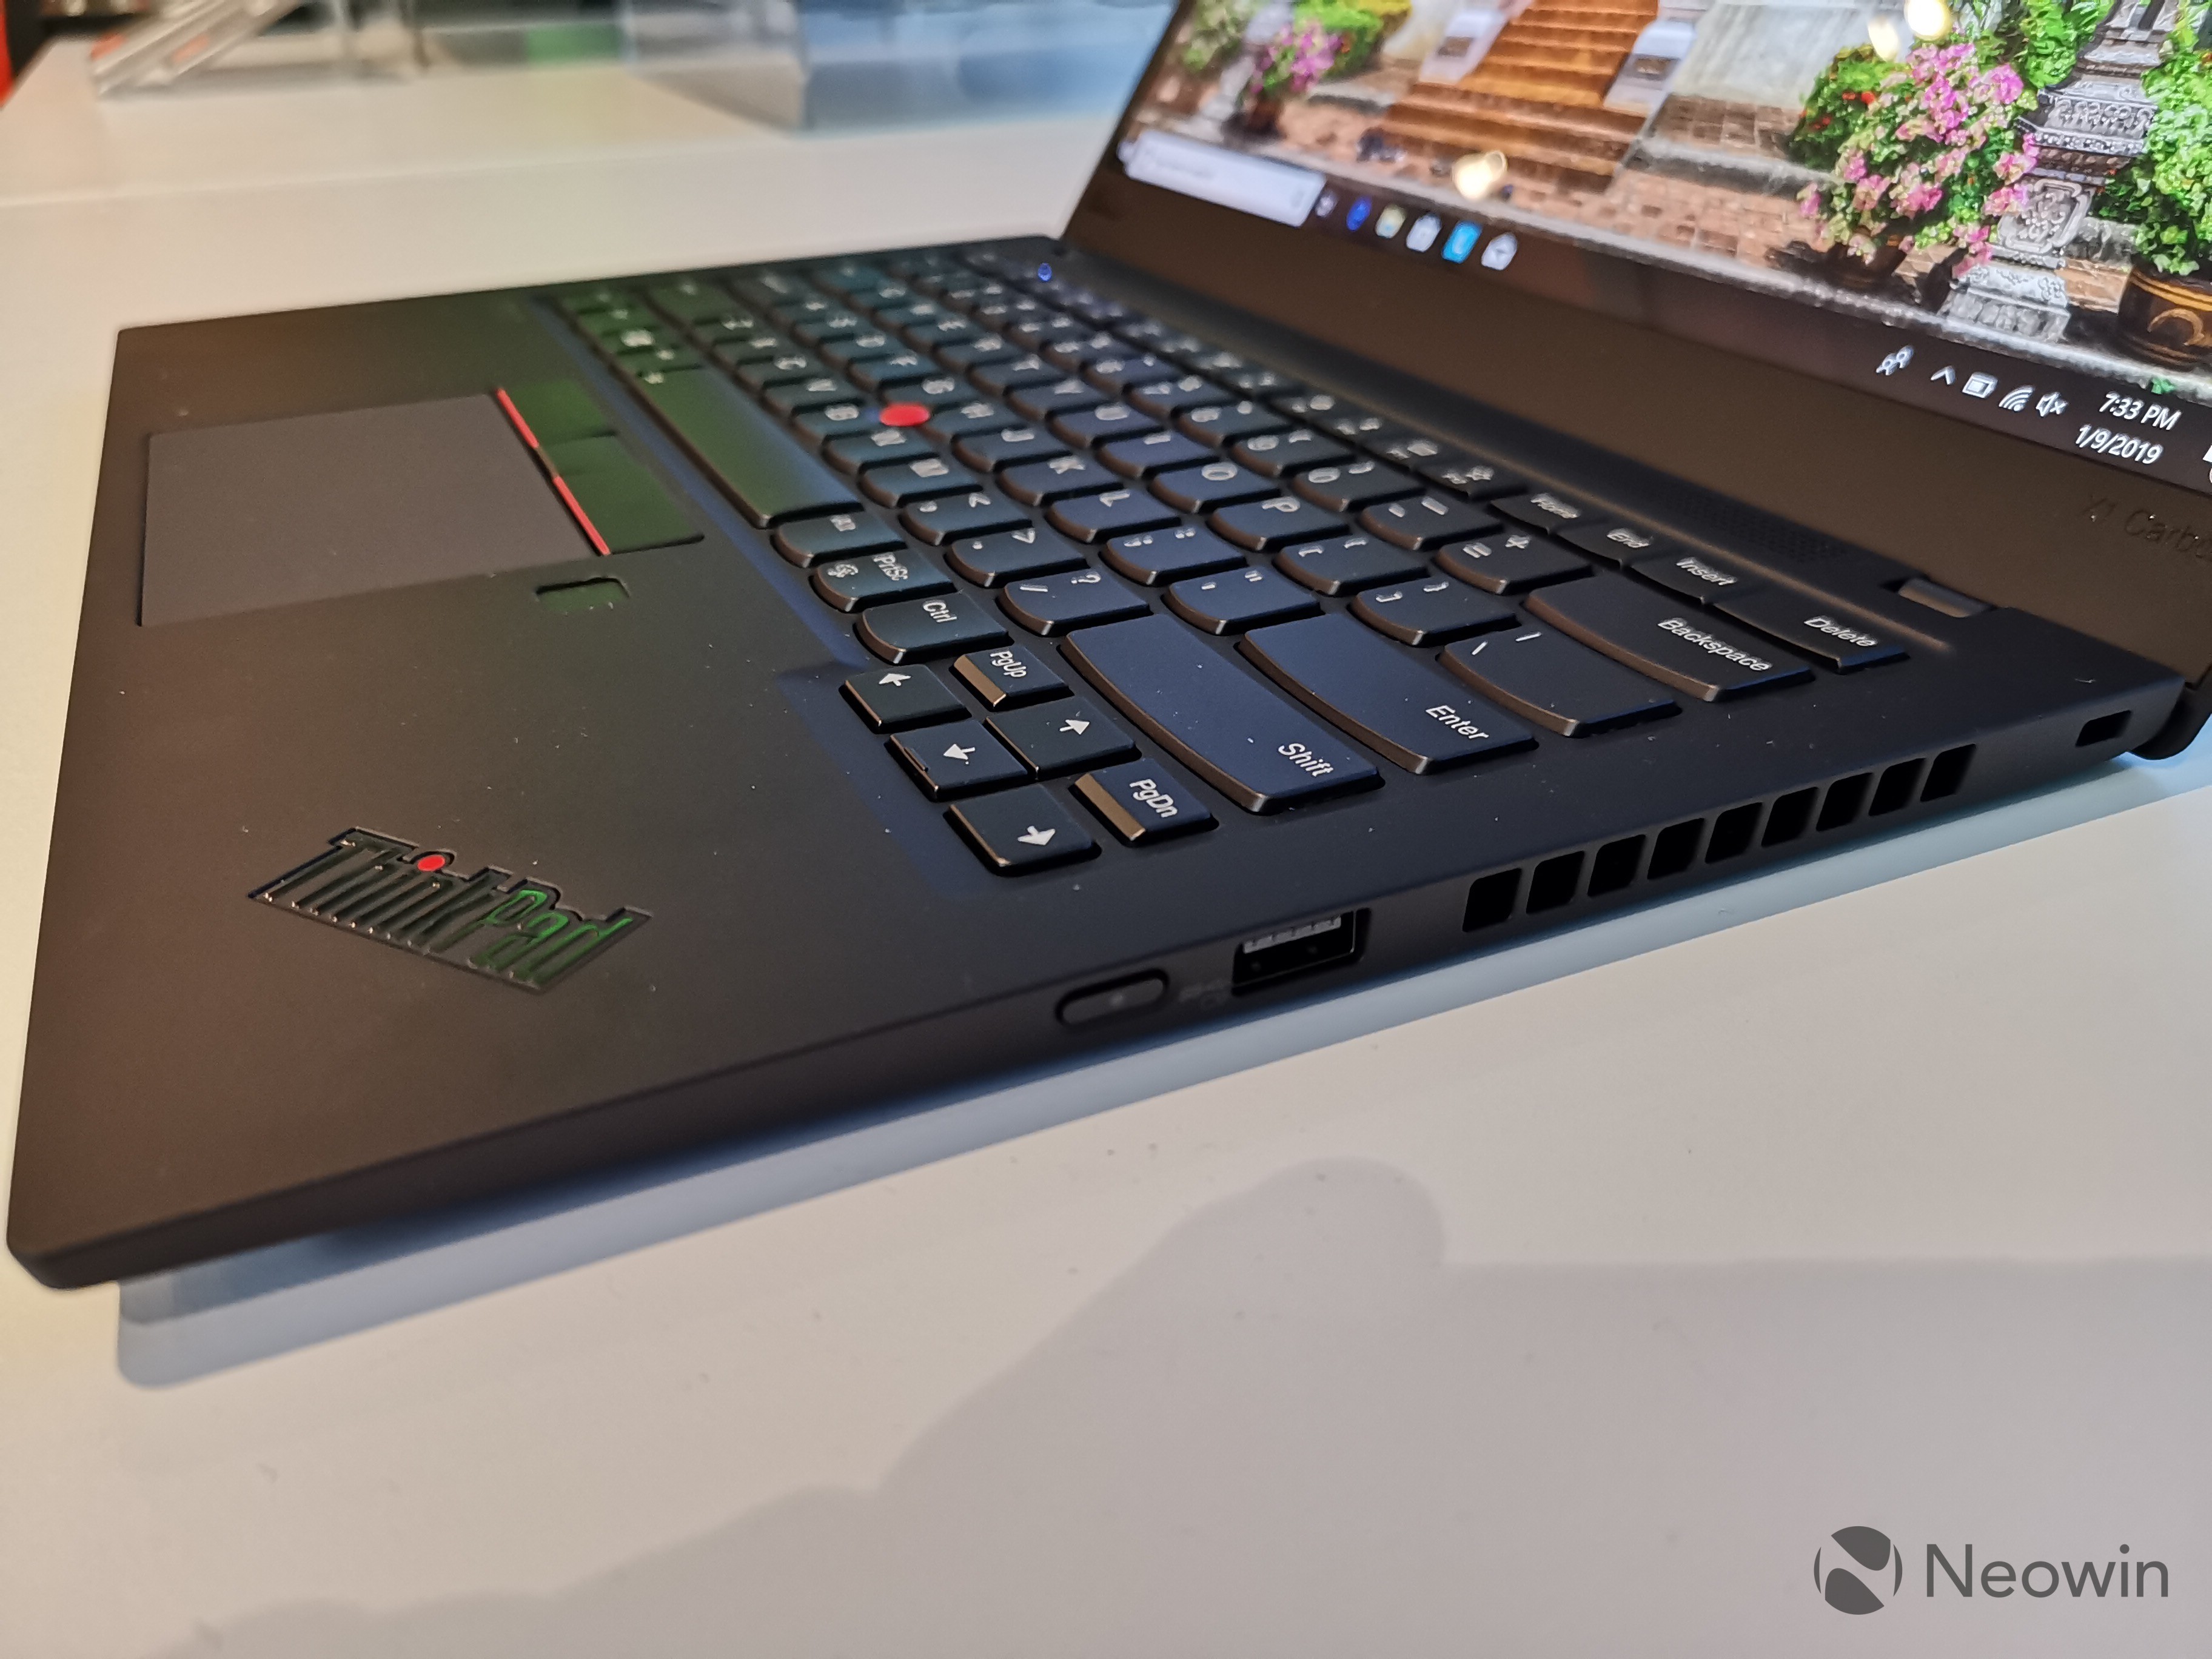 Hands on with Lenovo's new ThinkPad X1 Carbon and Yoga - Neowin